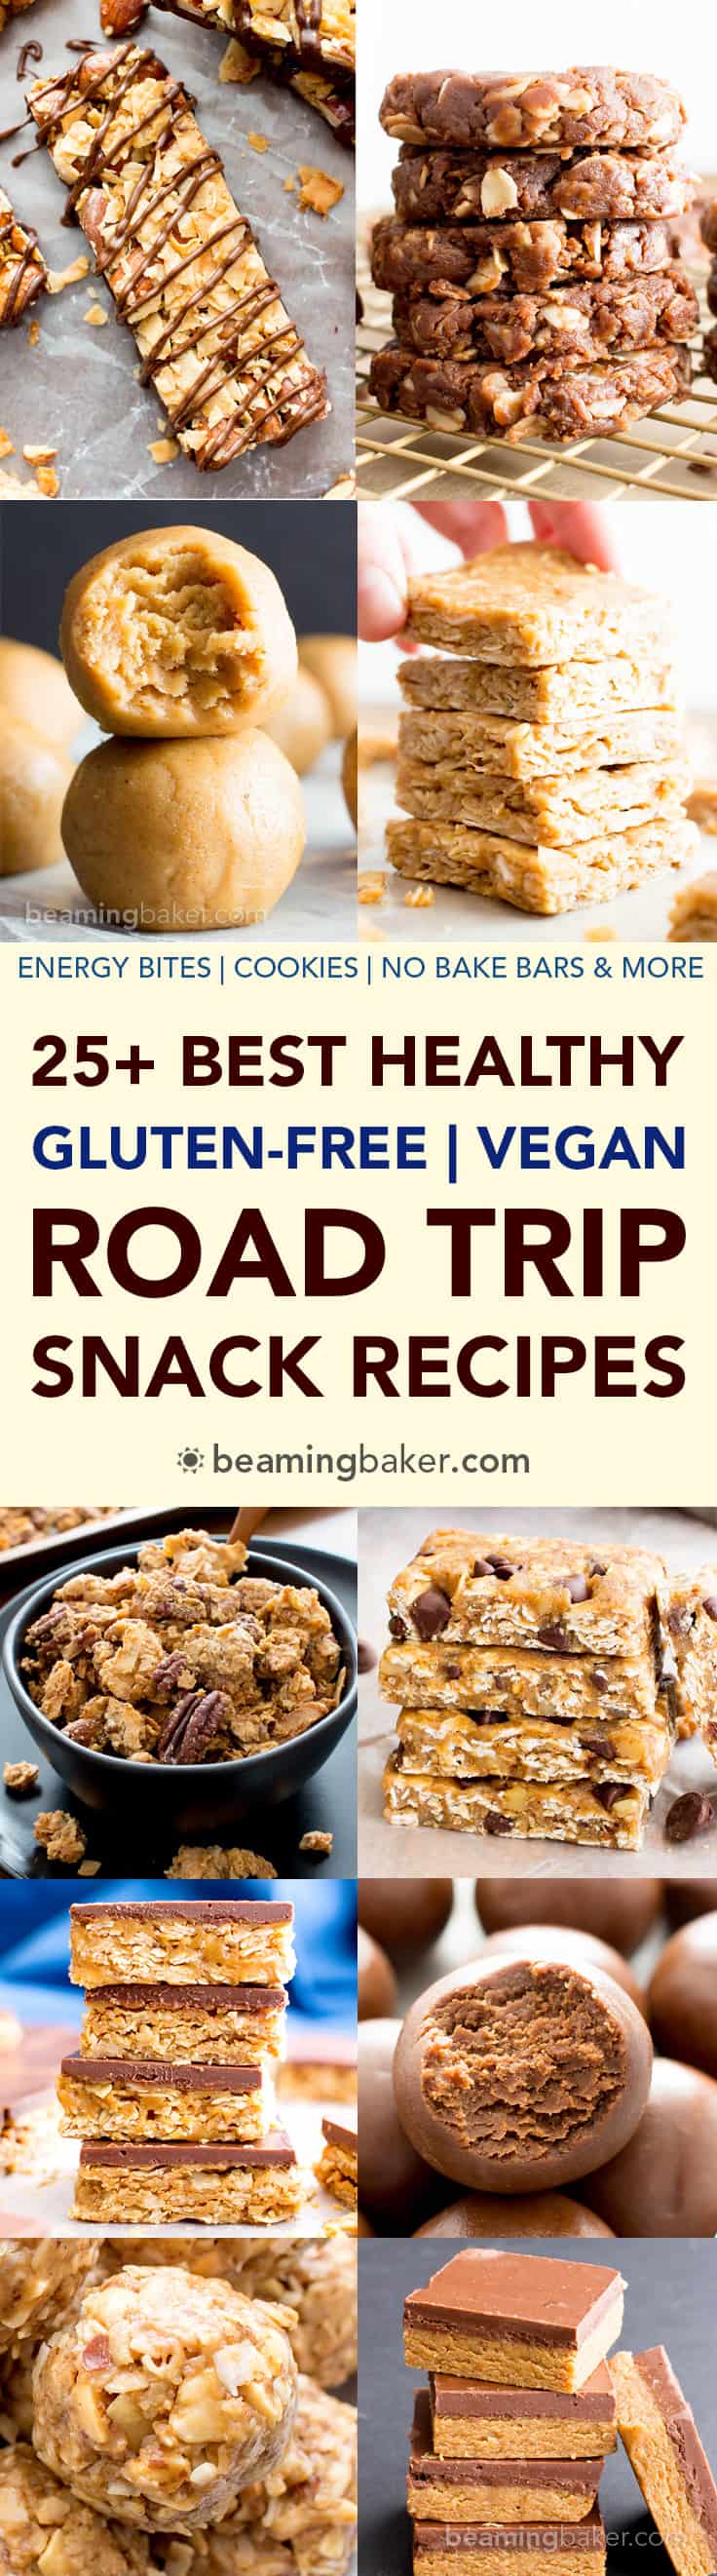 25+ Best Healthy Road Trip Snacks Recipes (V, GF): a tasty collection of the best healthy recipes for sweet and satisfying road trip snacks! #Vegan #GlutenFree #DairyFree #RefinedSugarFree #Snacks #NoBake | Recipes on BeamingBaker.com